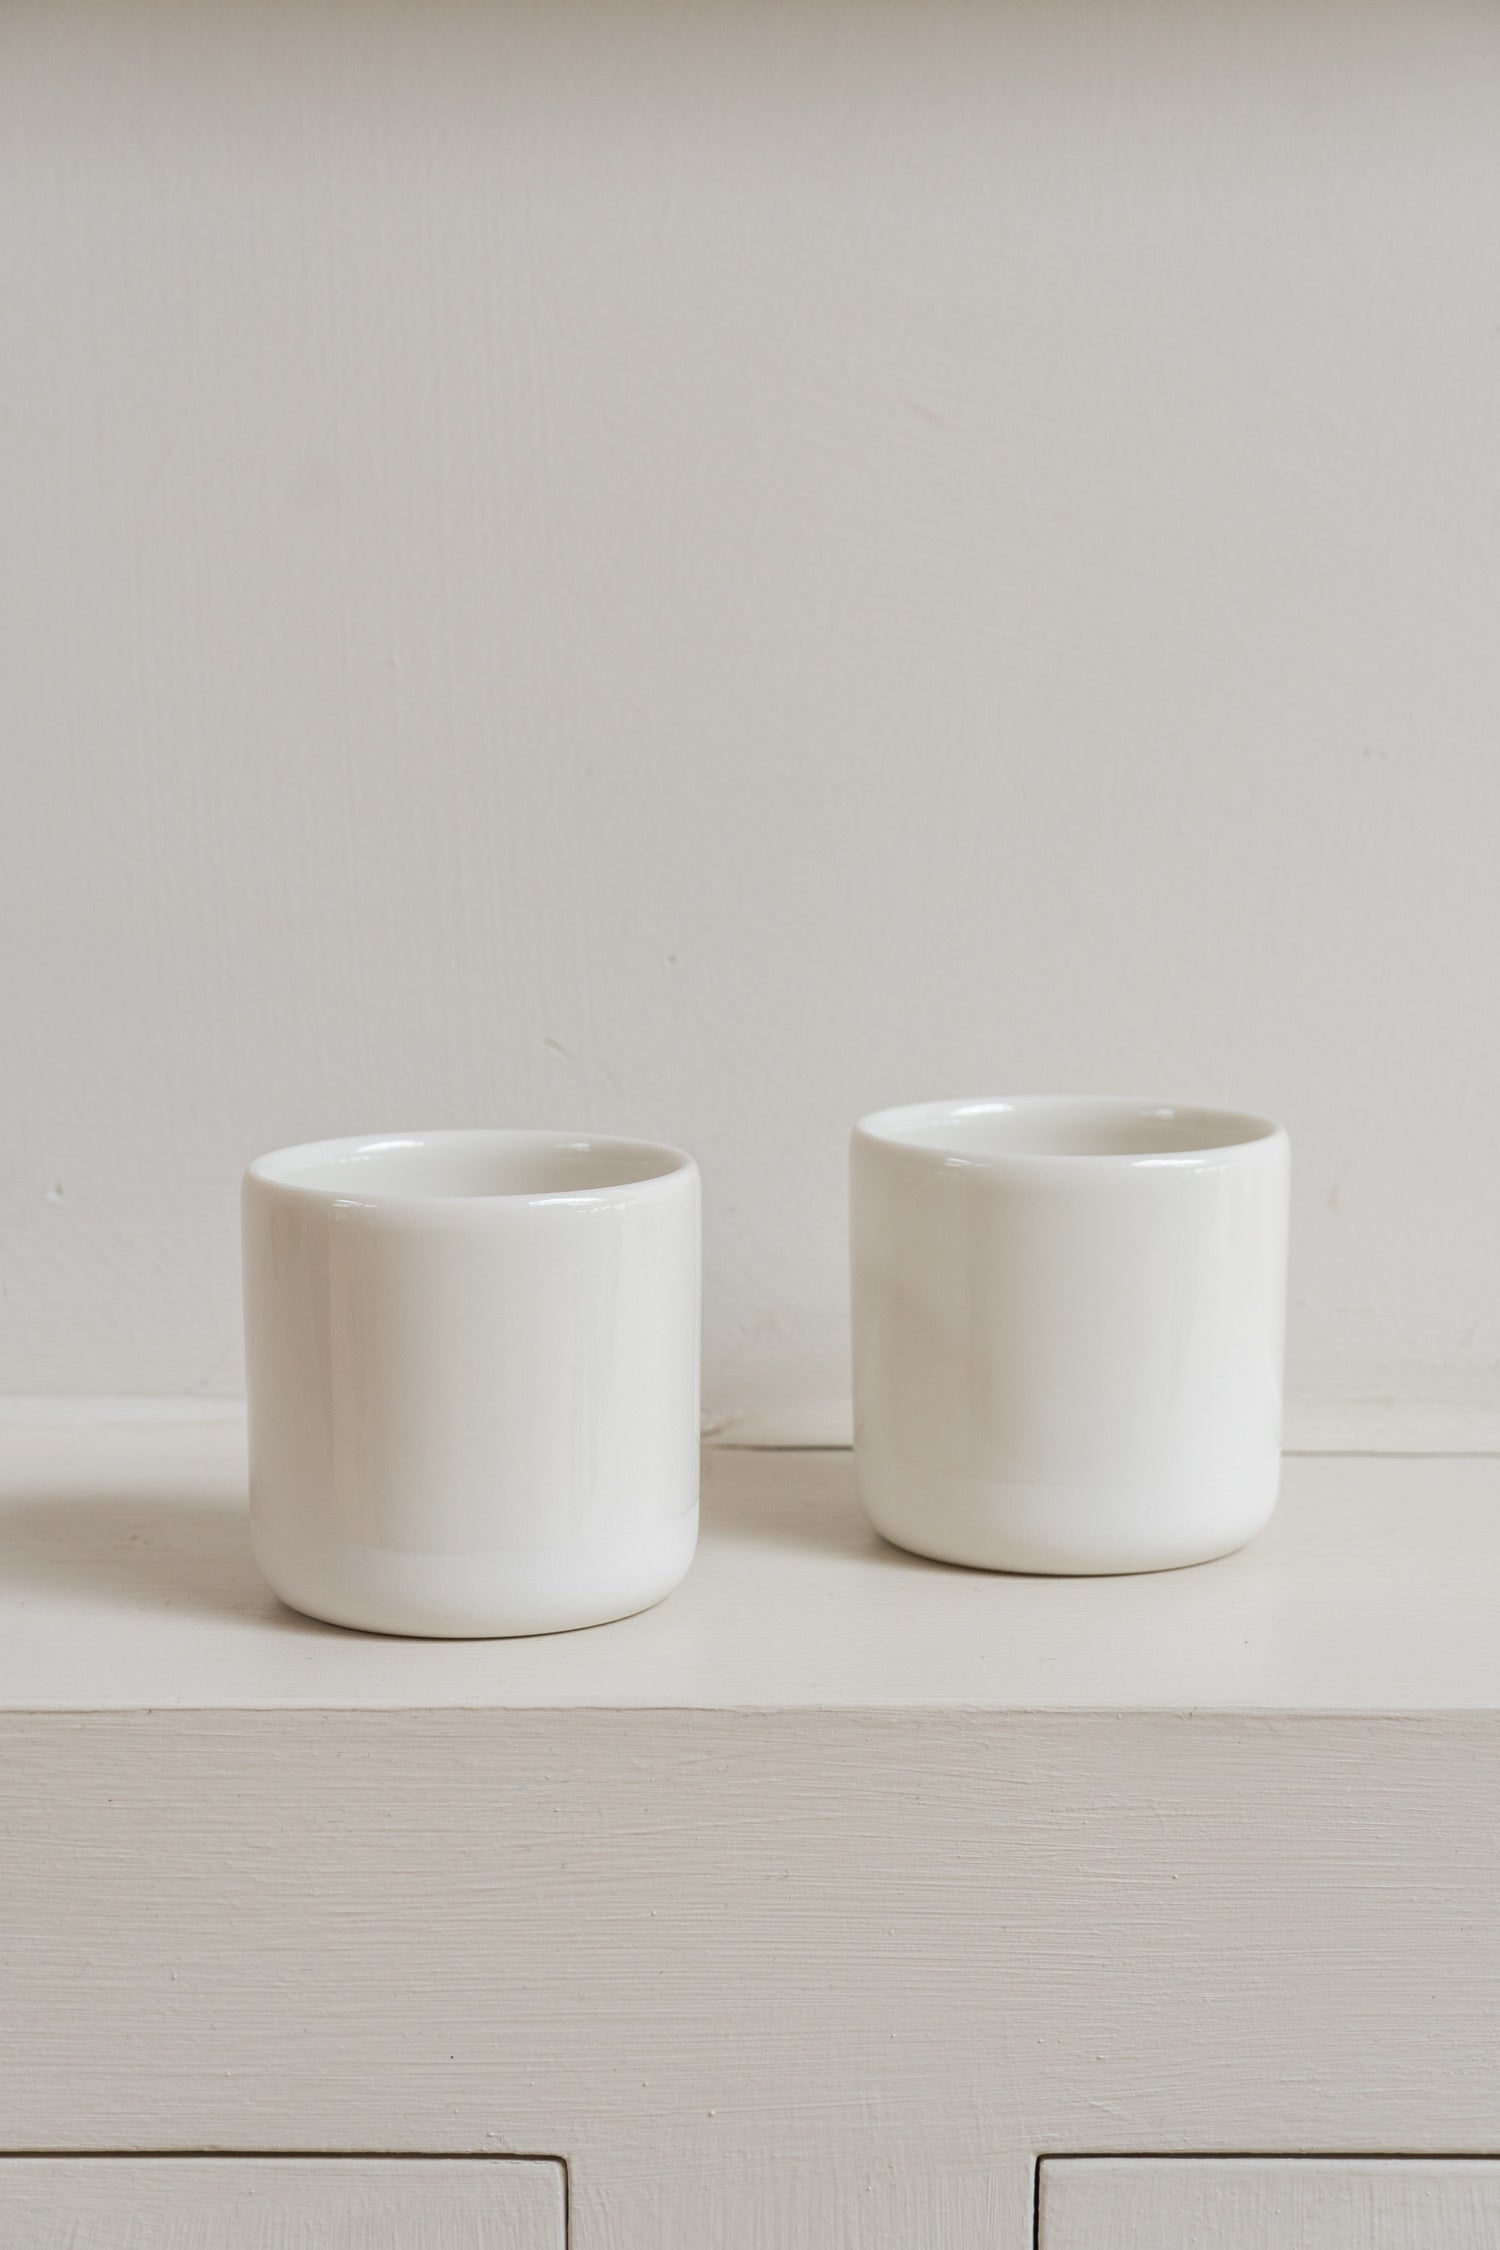 Two white Antibes Cups set on wall cabinet.